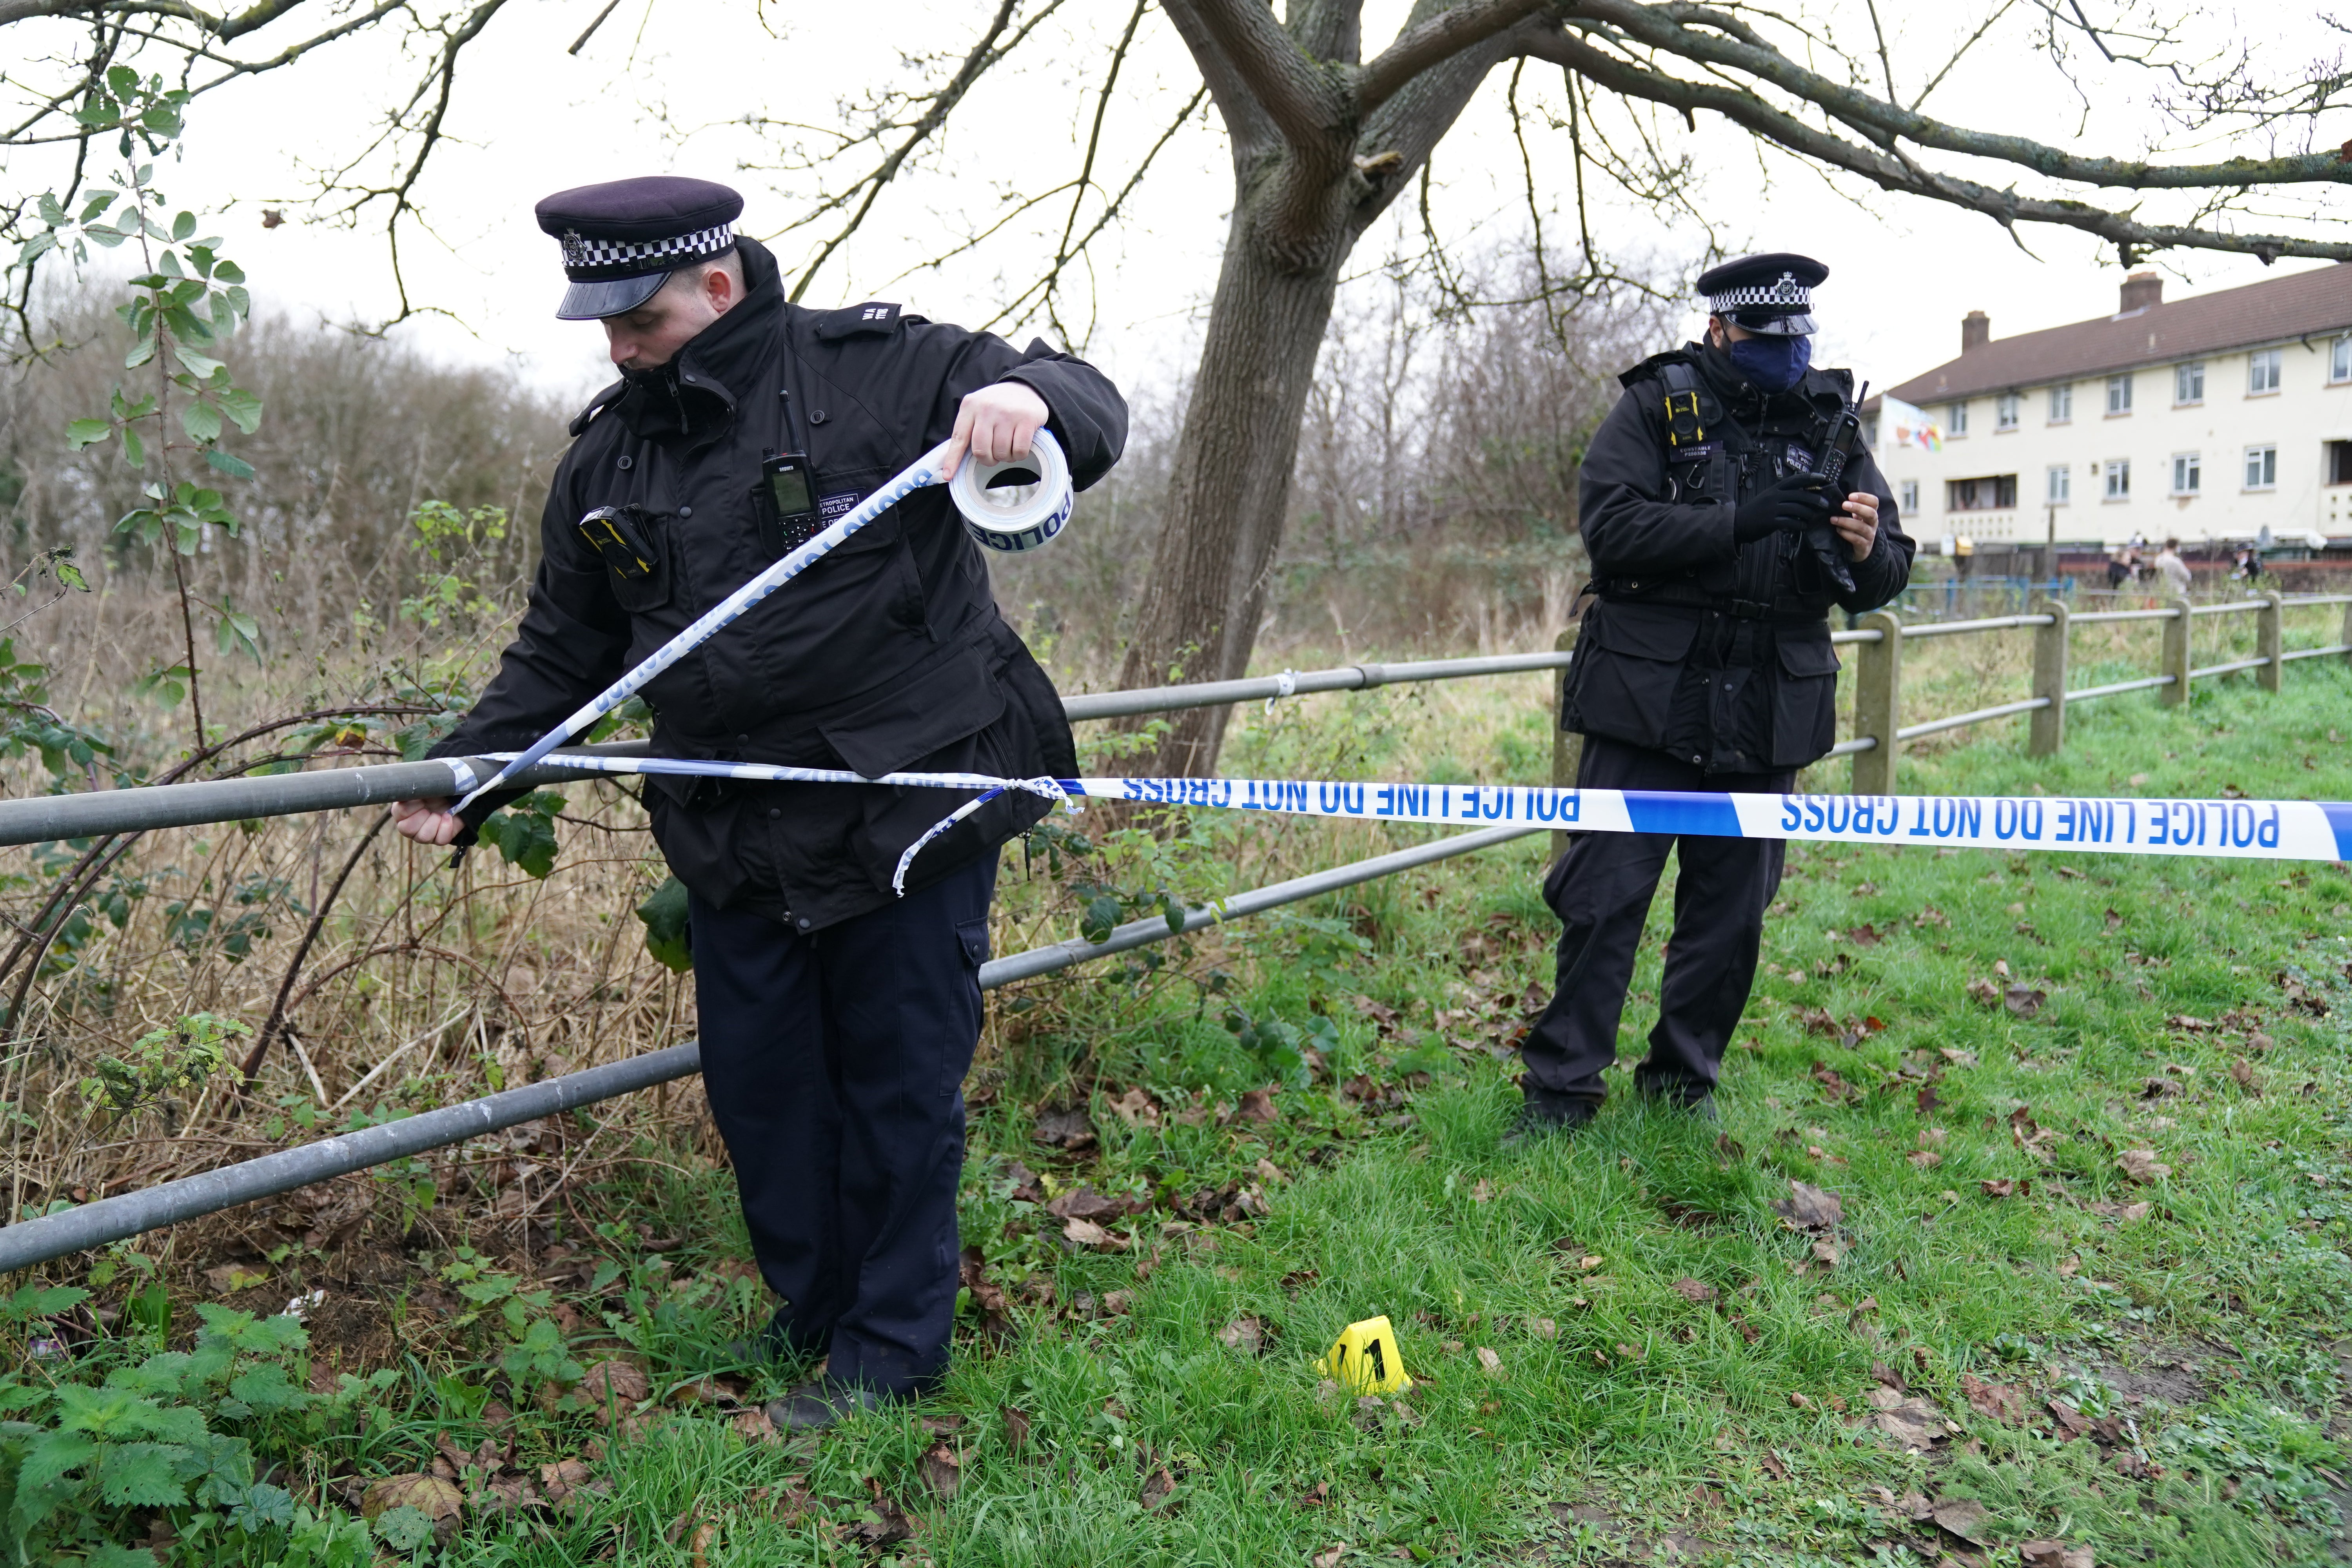 Police activity at Philpot’s Farm open space, close to Heather Lane in Yiewsley, Hillingdon (Kirsty O’Connor/PA)